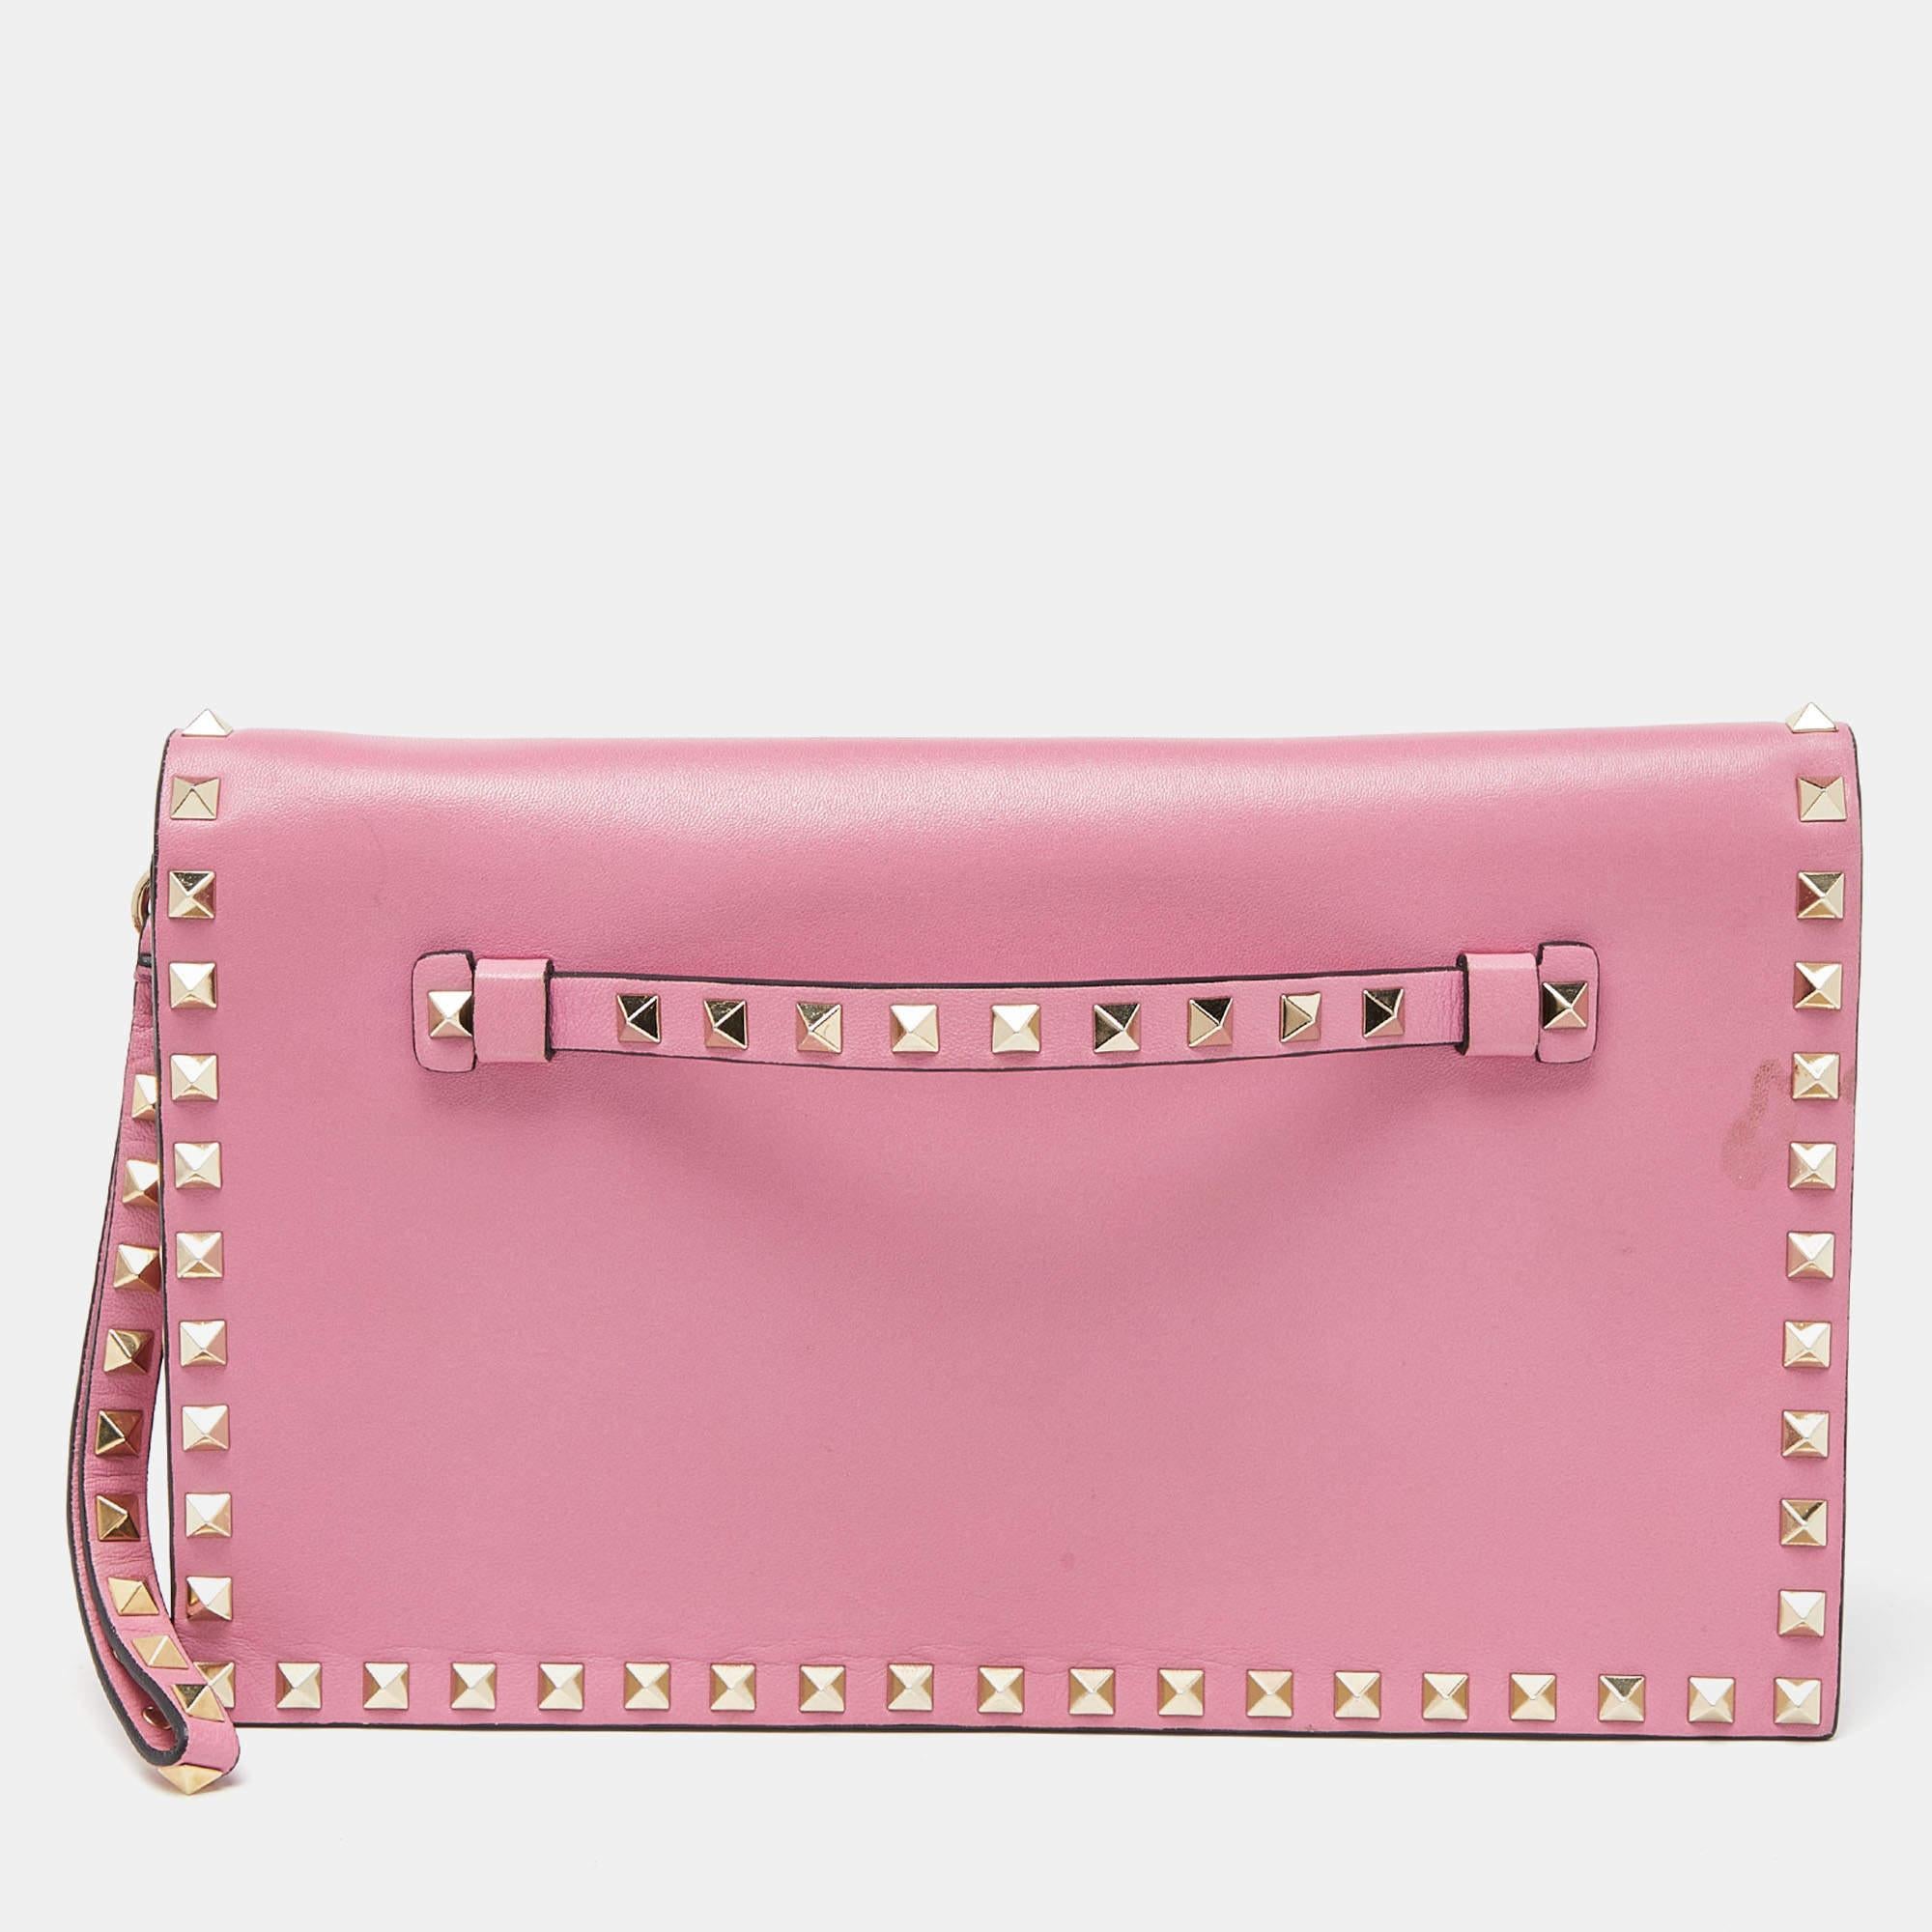 Have all eyes on you when you flaunt this Rockstud clutch by Valentino. Crafted from pink leather, it comes with the iconic Rockstud detailing on the exterior. The leather-lined interior houses compartments and a zip pocket. Complete with a